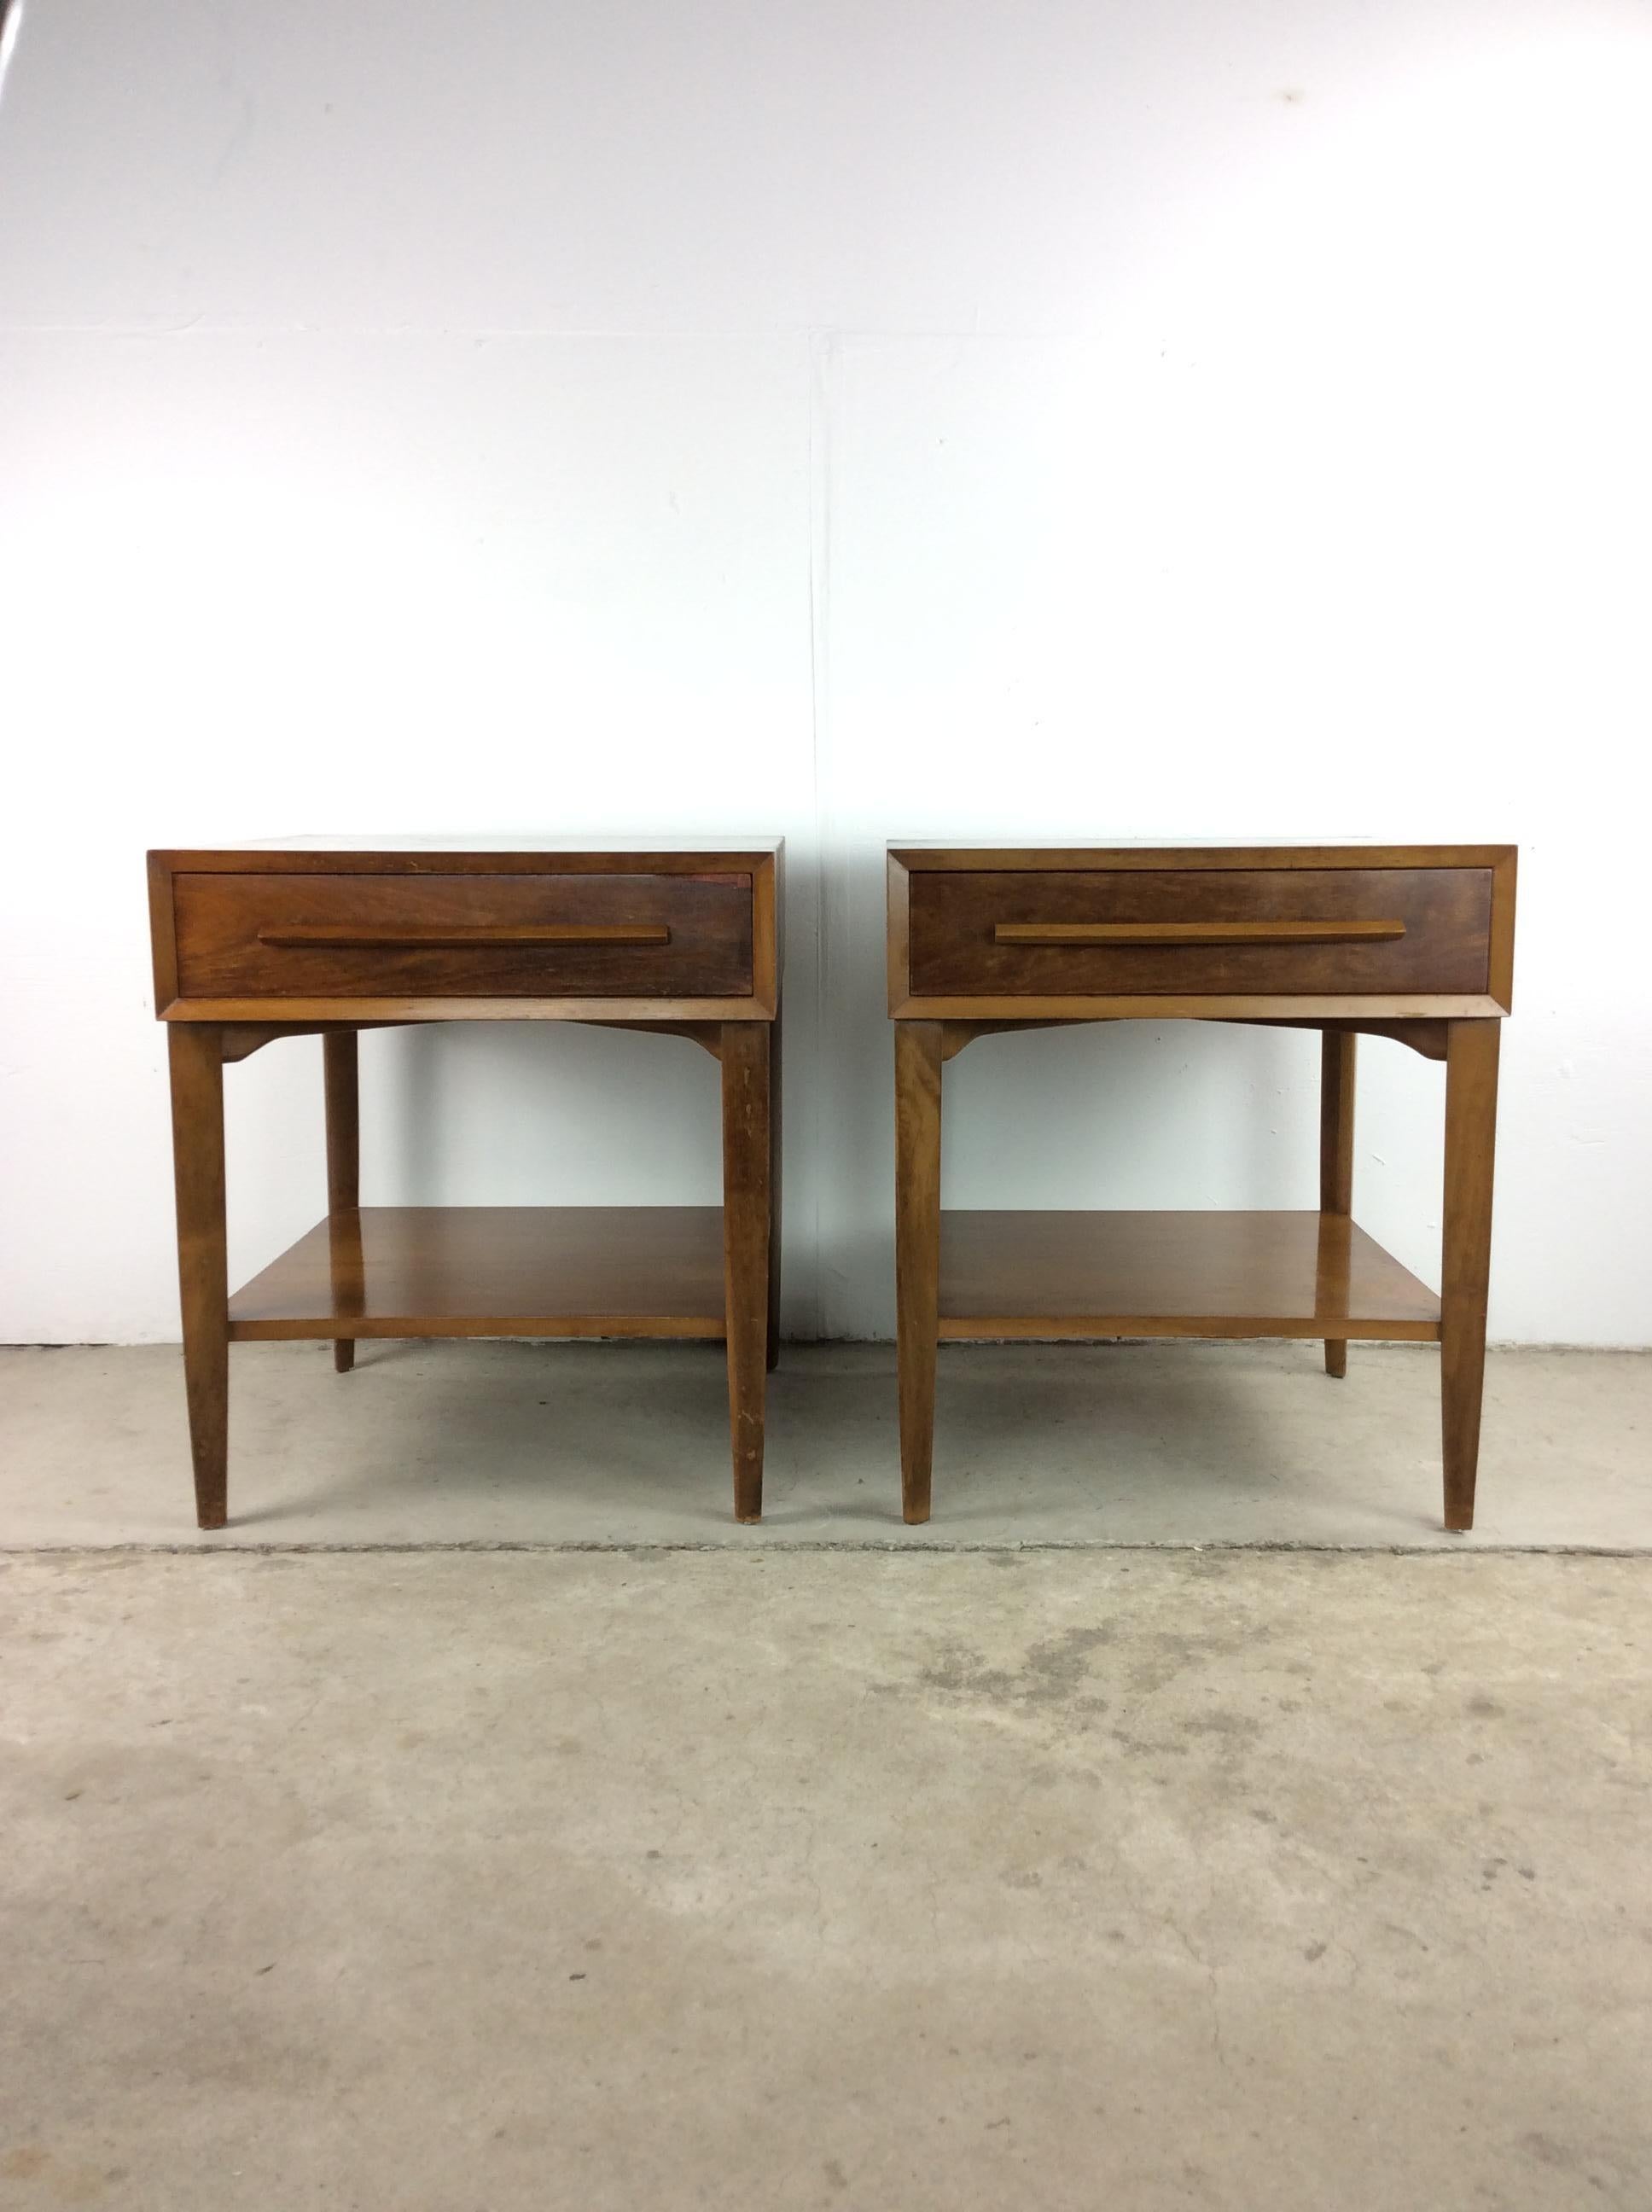 This pair of mid century modern nightstands by Widdicomb feature hardwood construction, walnut veneer with original finish, single dovetailed drawer, sculpted wood handle, lower storage shelf, finished back, and tall tapered legs.

Matching lowboy